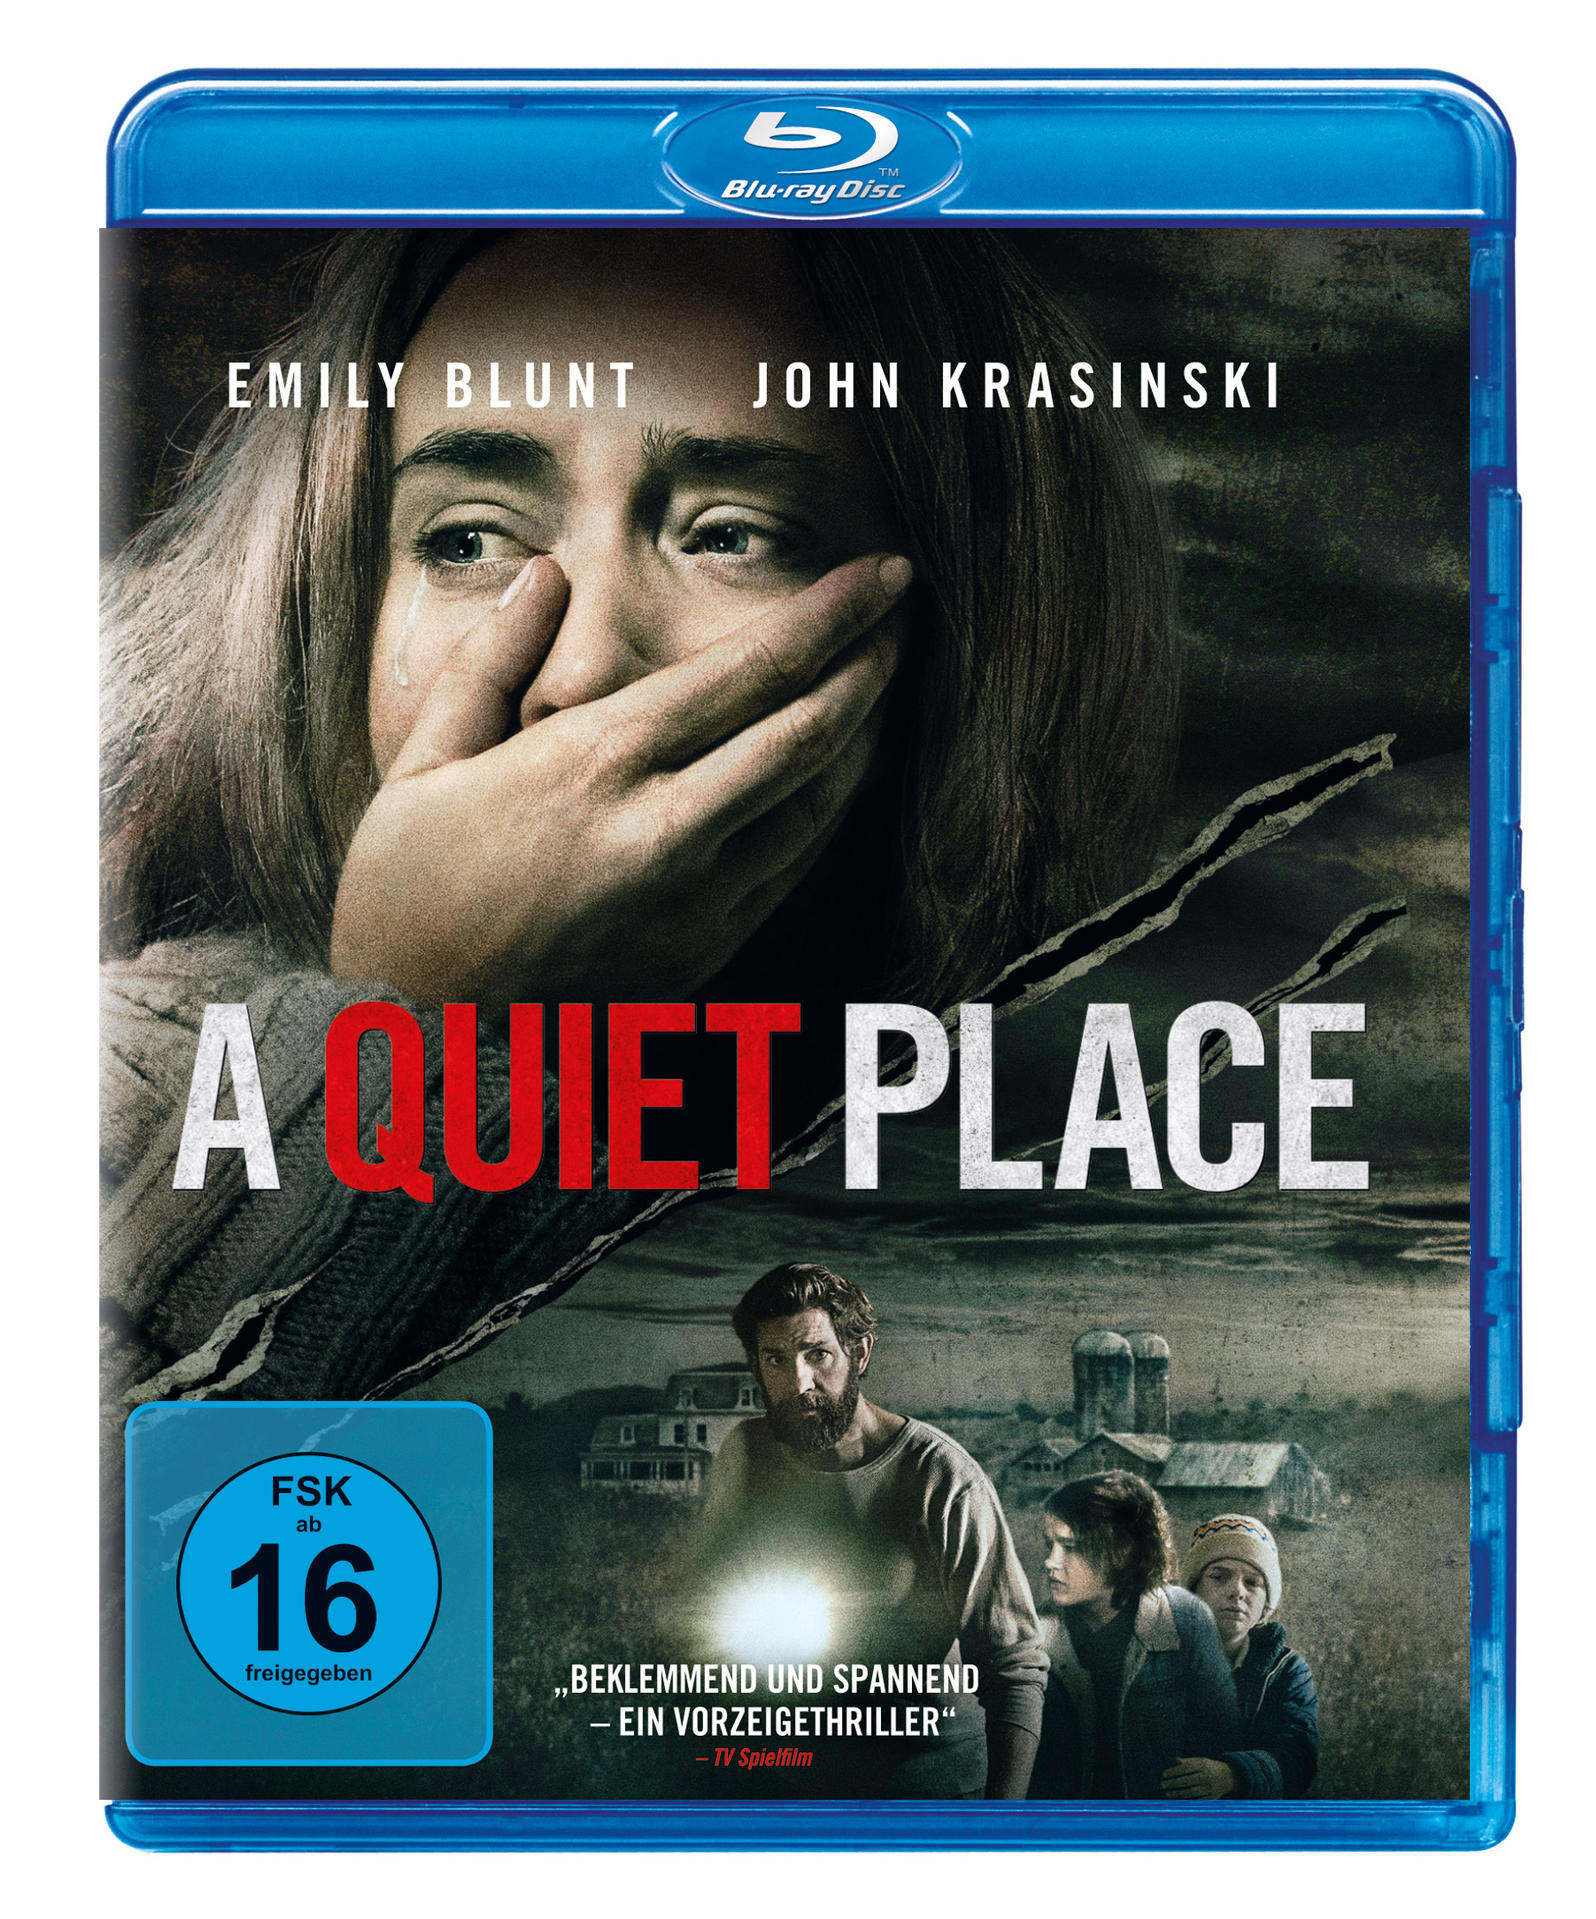 Blu-ray Quiet Place A